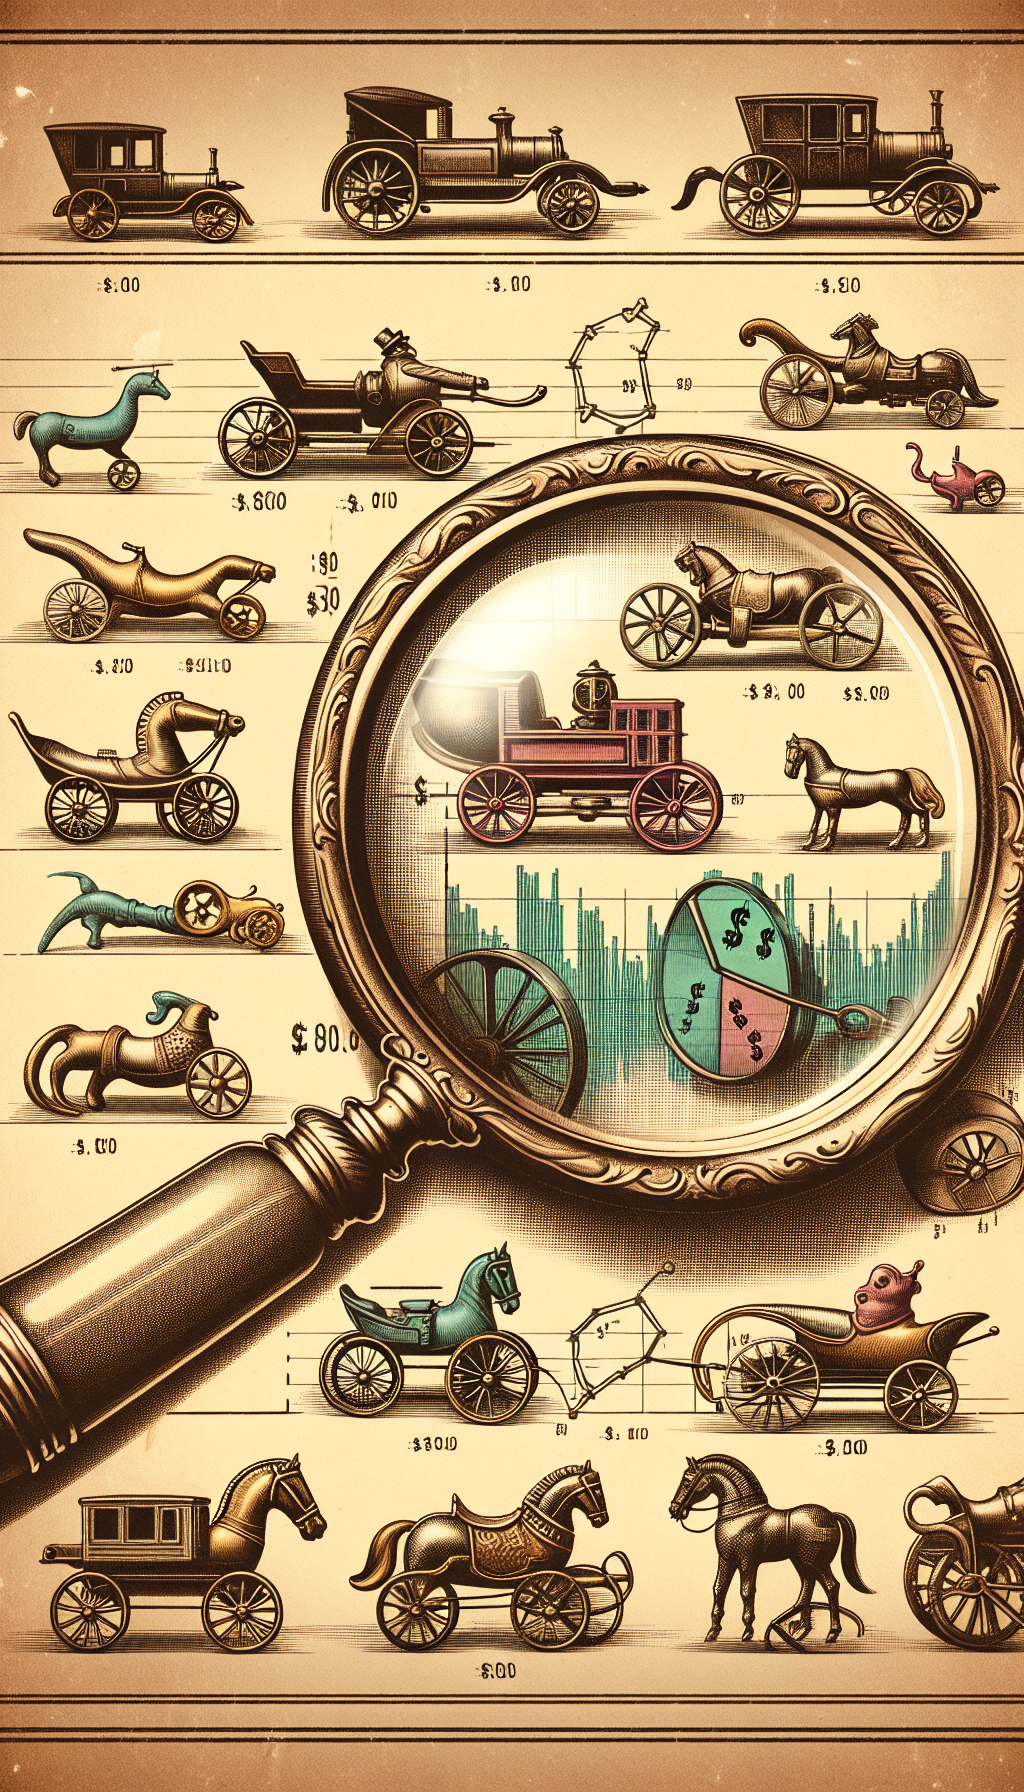 A sepia-toned illustration depicts an antique magnifying glass hovering over a colorful array of vintage cast iron toys, with price tags floating above them. Each price tag shows a graph symbolizing the market value trend. The magnifying glass reflects the toys' key features, with subtle dollar signs etched onto its surface, merging the past with the analytical aspect of collecting.